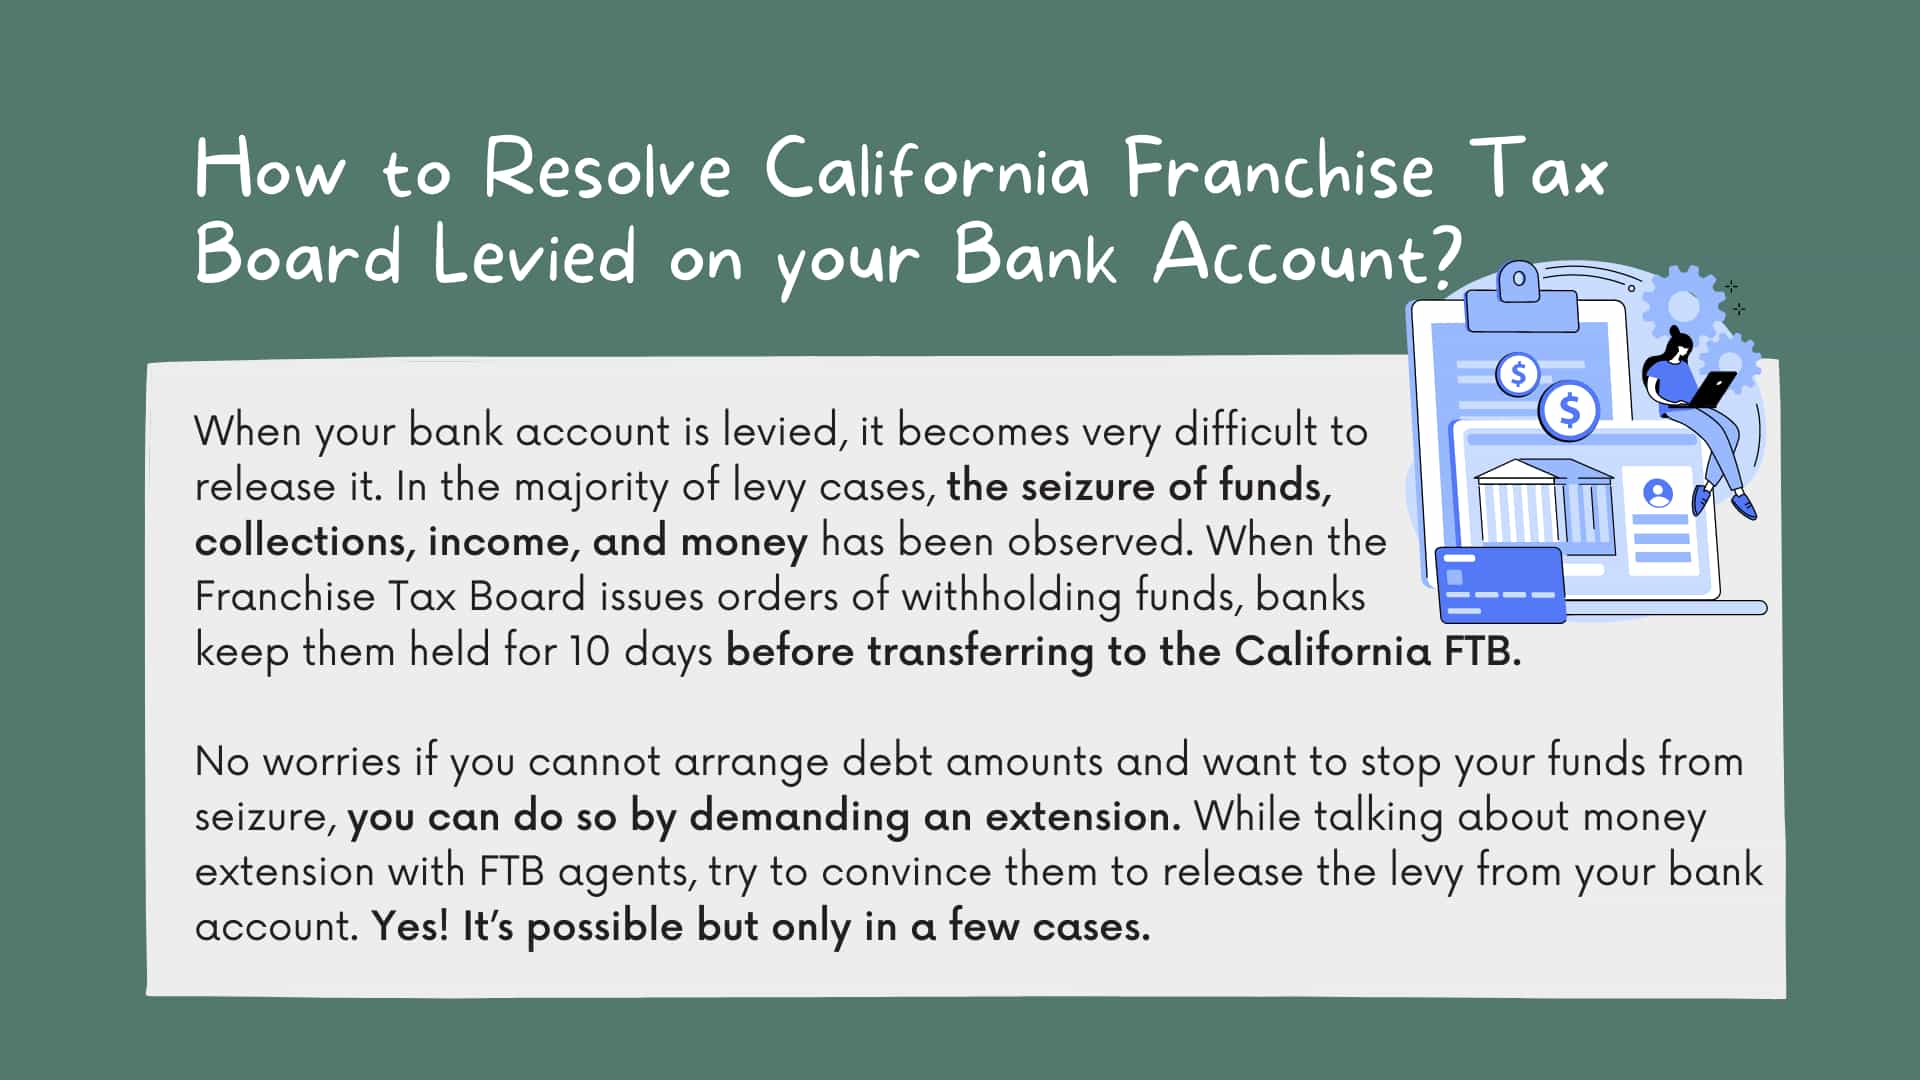 How to Resolve California Franchise Tax Board Levied on your Bank Account